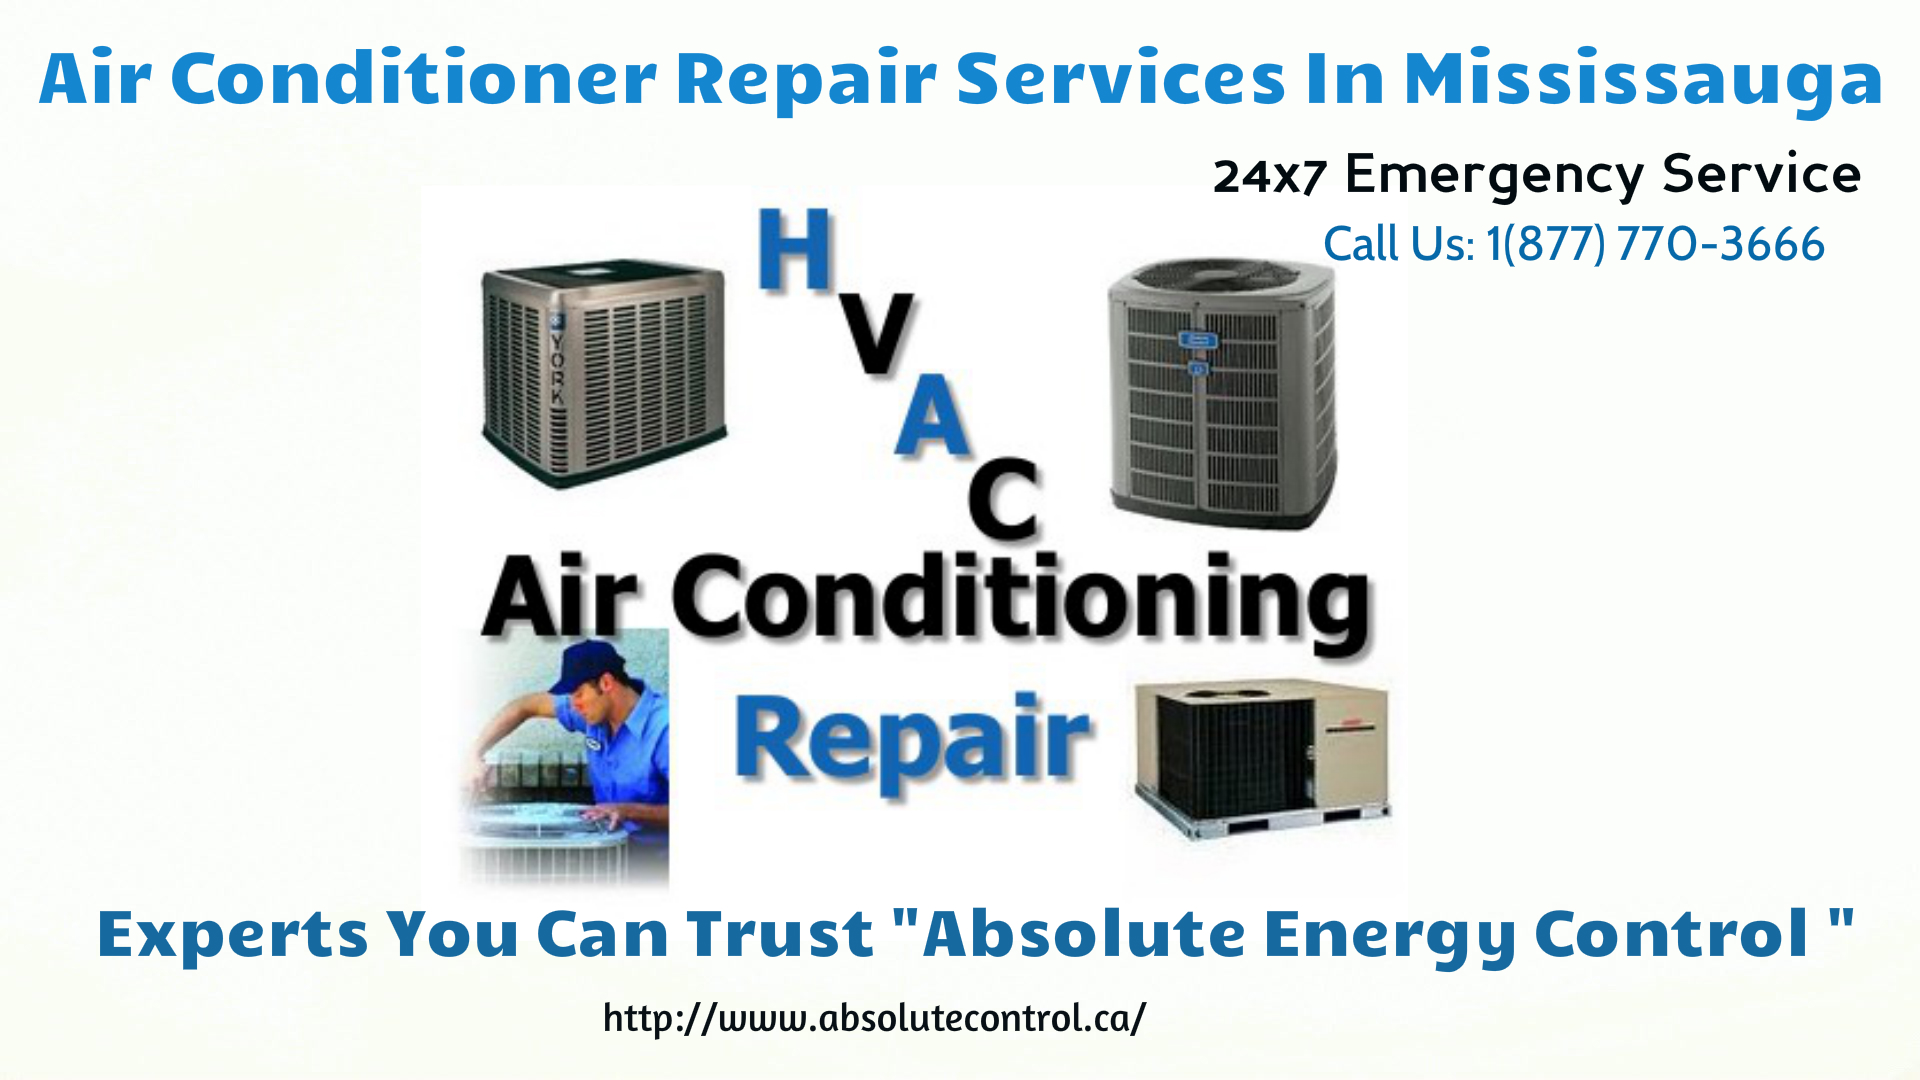 Air Conditioner Repair Mississauga   Free Images At Clker Com   Vector    